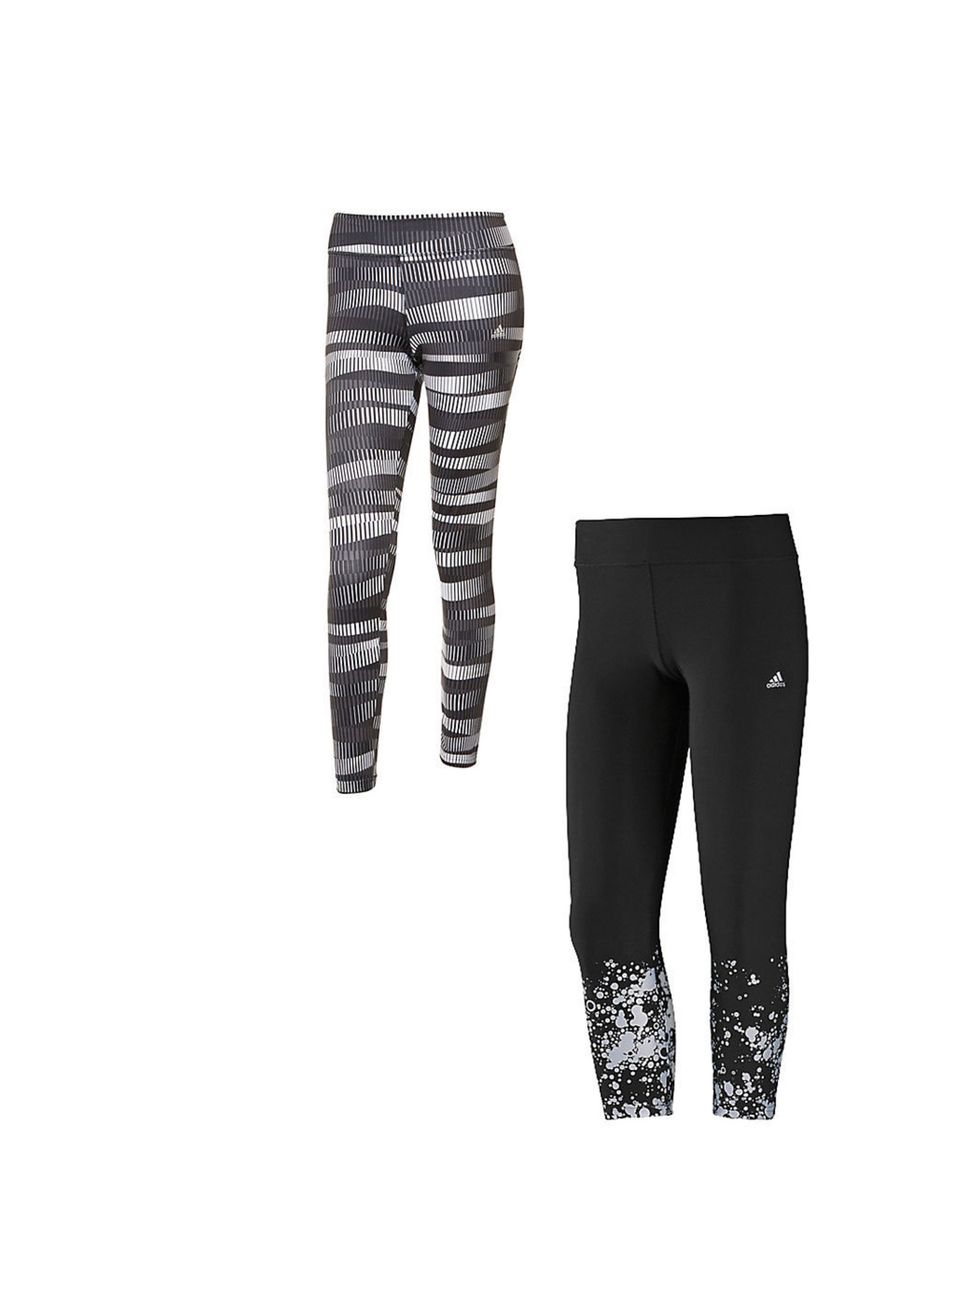 <p>You can never have too many leggings in your workout wardrobe. And these new designs by Adidas are fun and functional. </p><p><a href="http://www.johnlewis.com/sport-leisure/c5000011?intcmp=hp_tl_a_fitnessregime_X200114">Adidas Women's Ultimate All Ove